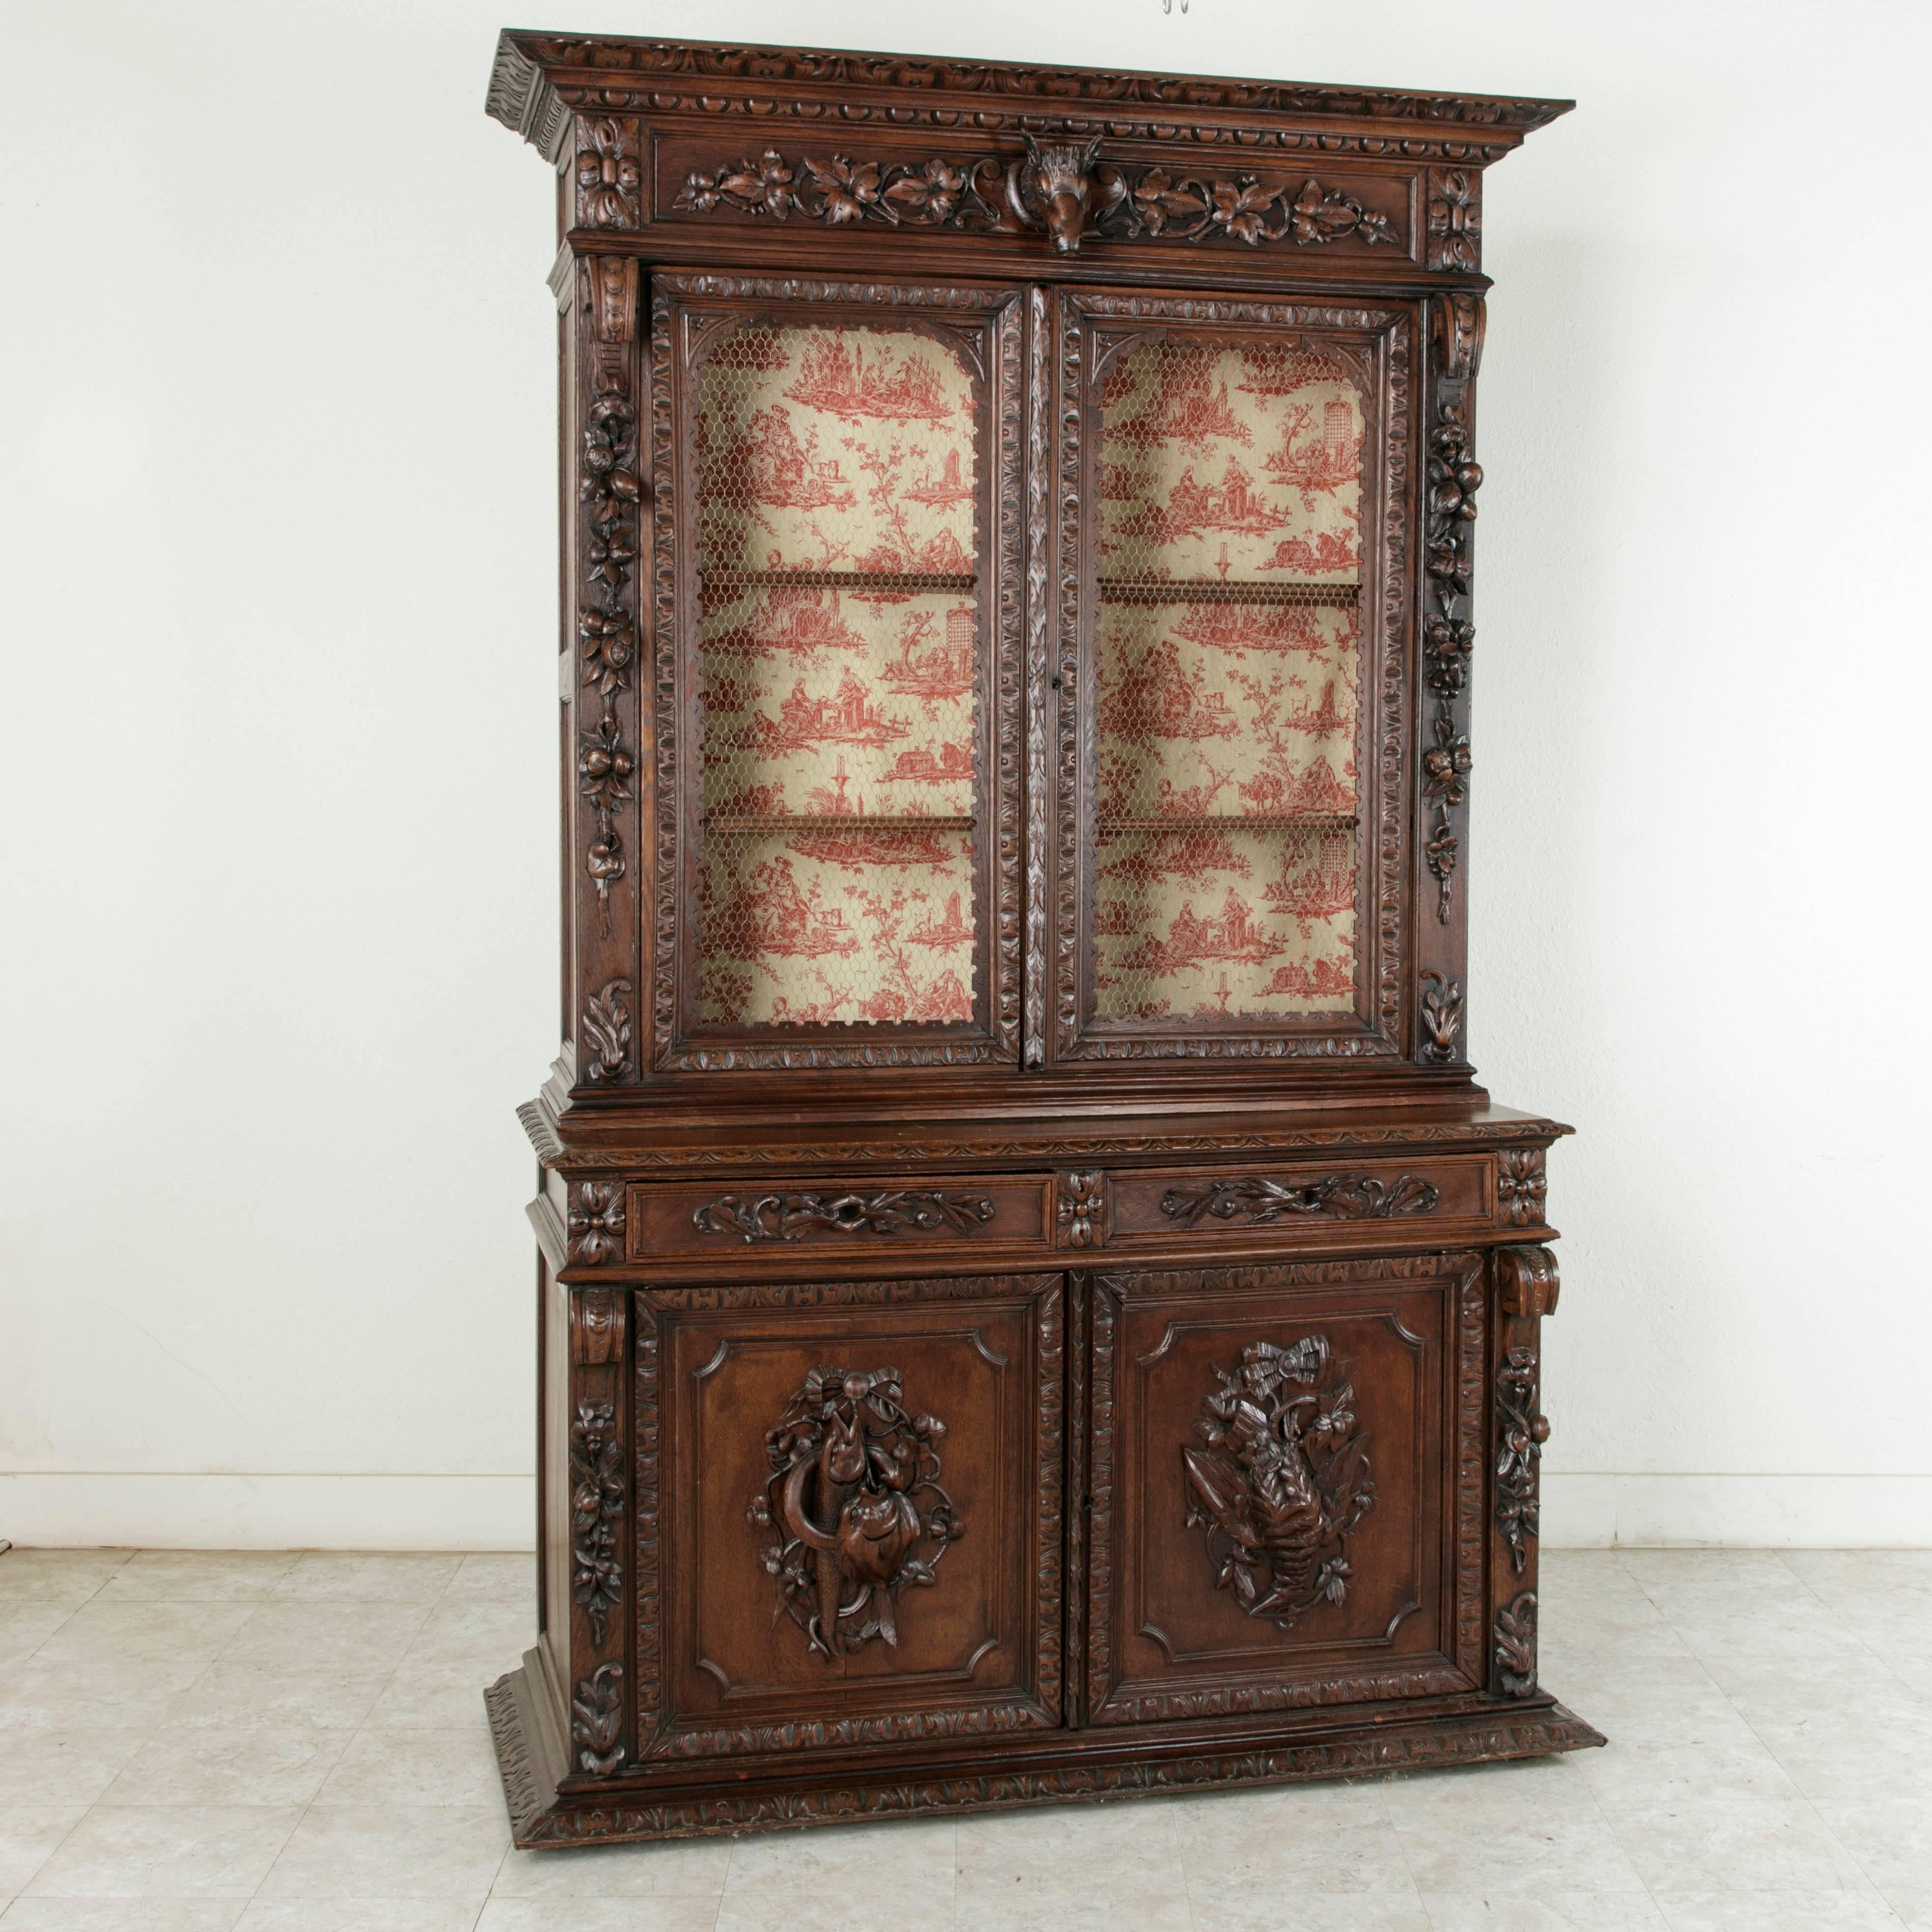 This impressive French oak Henri II style buffet deux corps or bookcase from the late 19th century features detailed hand carvings with hunting and fishing attributes. The upper cabinet displays a wild boar's head at its crown surrounded by grape